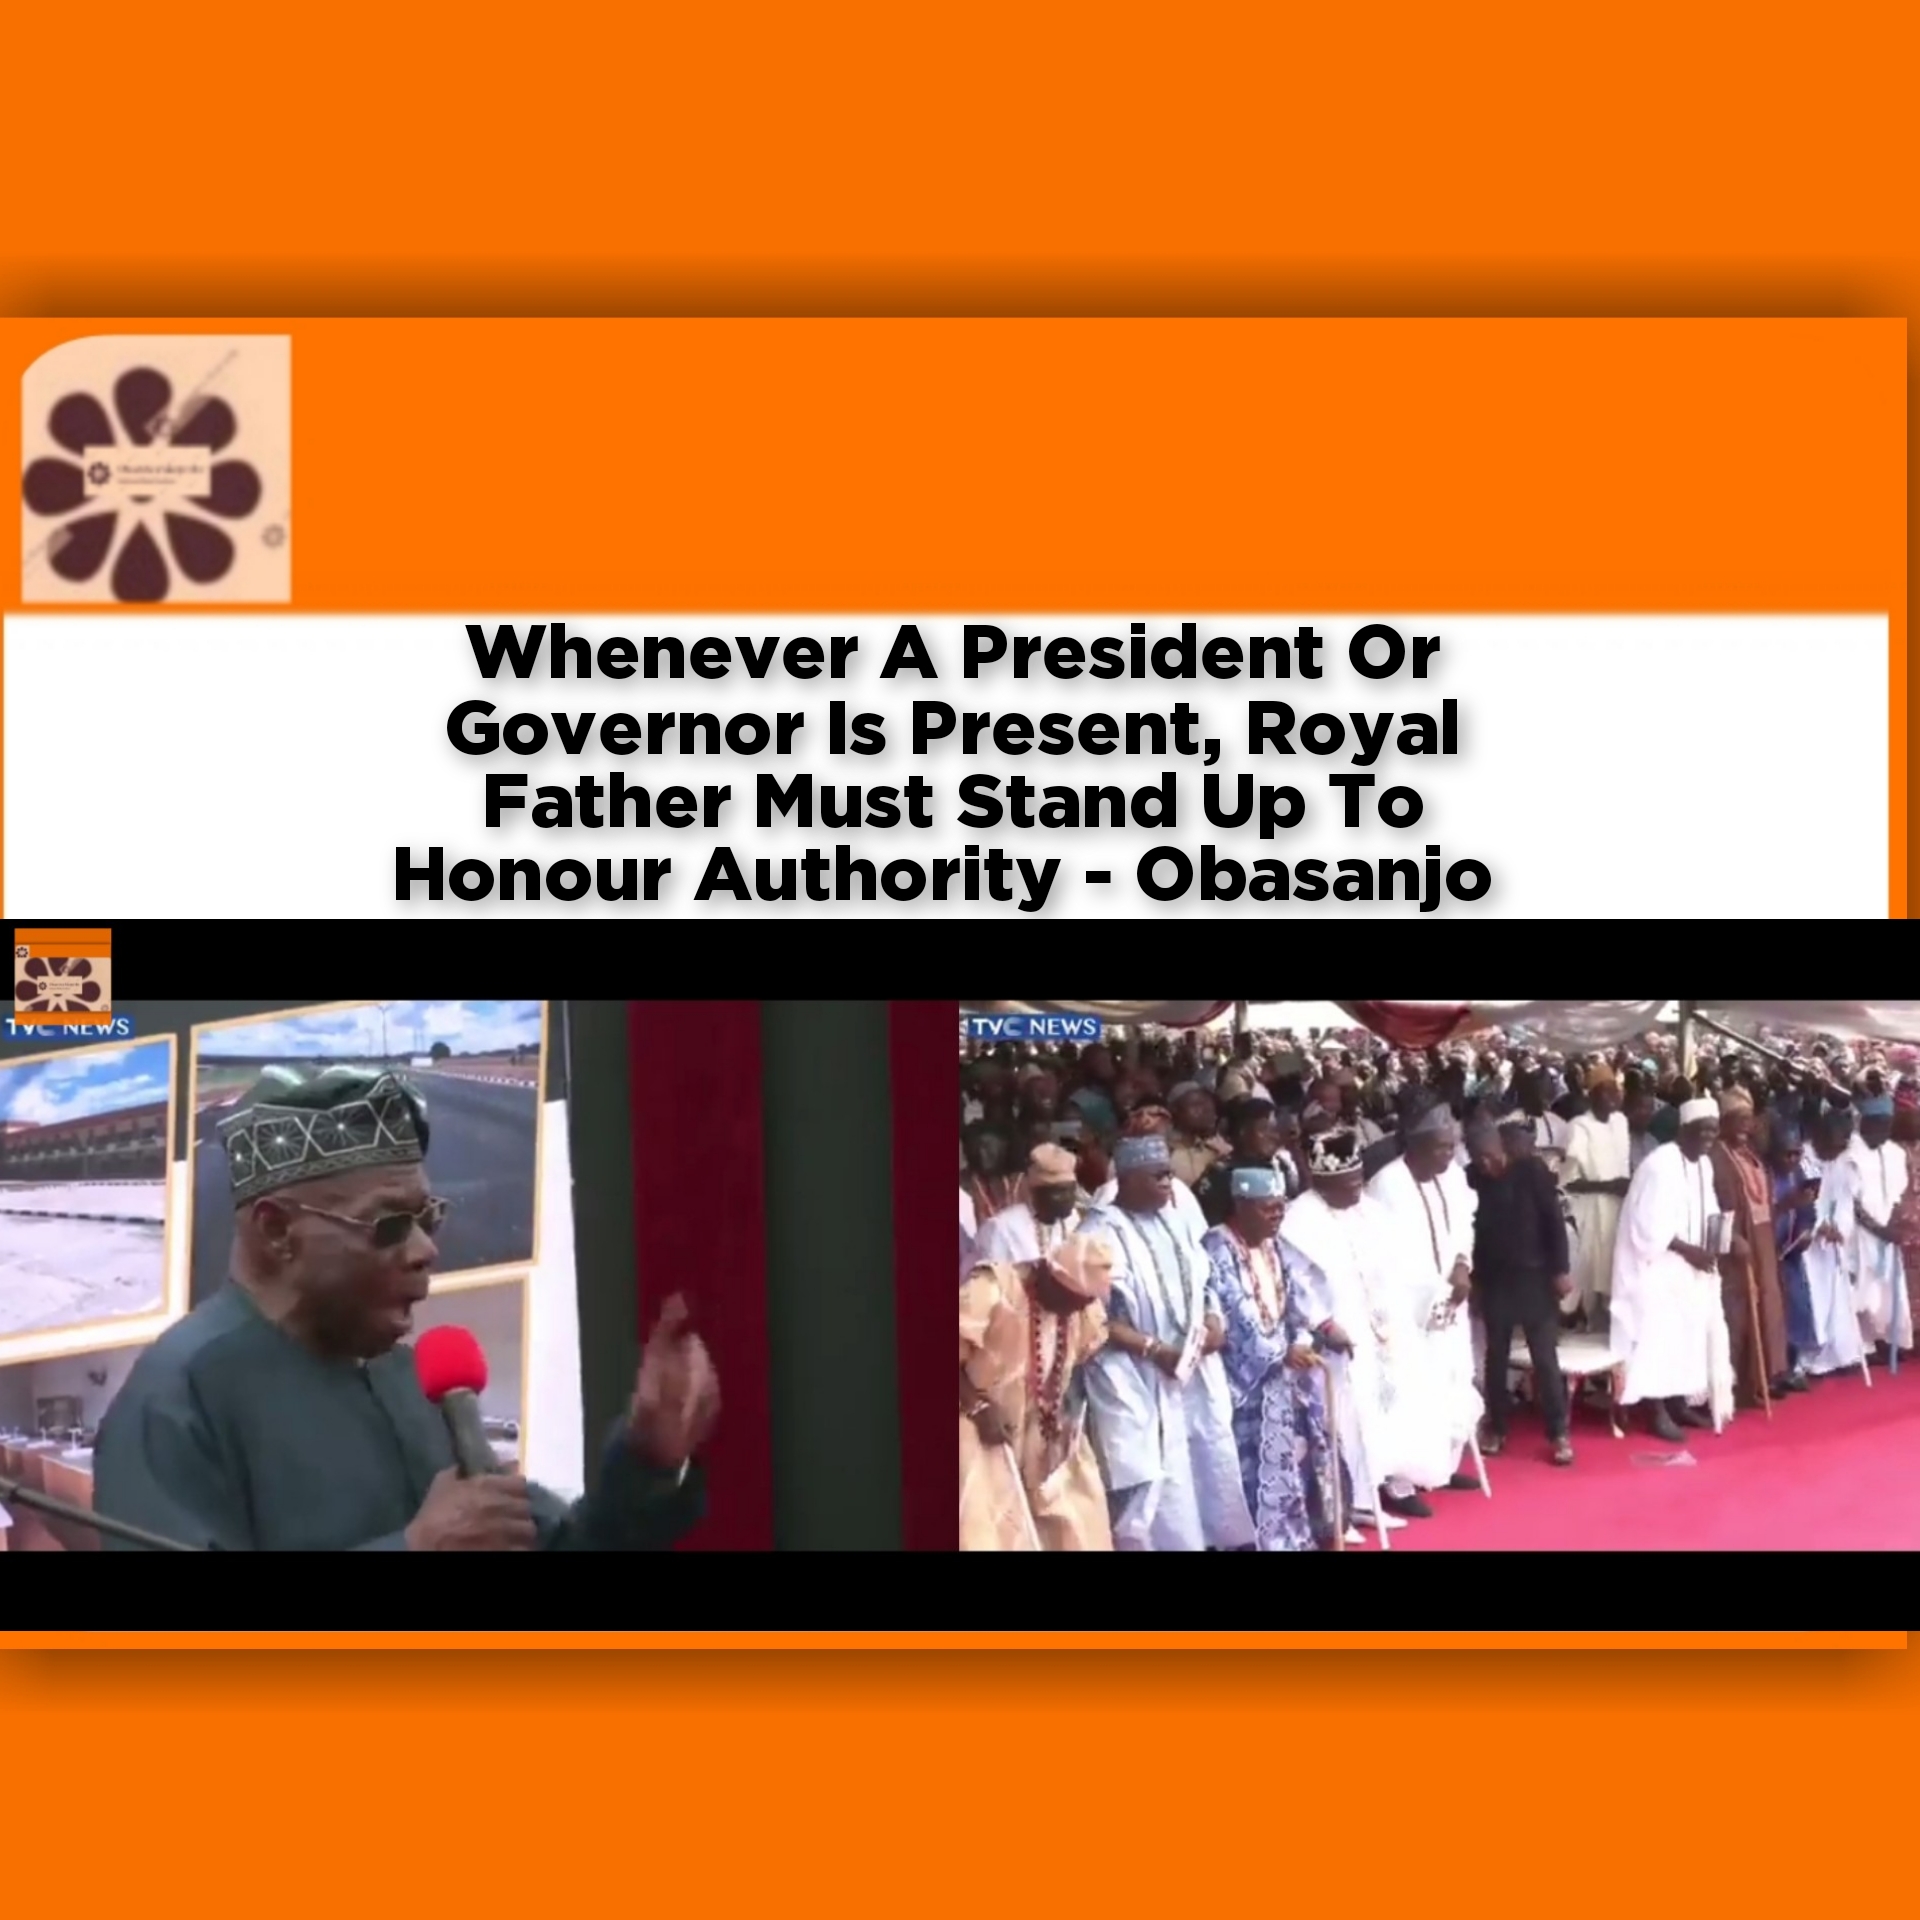 Whenever A President Or Governor Is Present, Royal Father Must Stand Up To Honour Authority - Obasanjo ~ OsazuwaAkonedo #politics